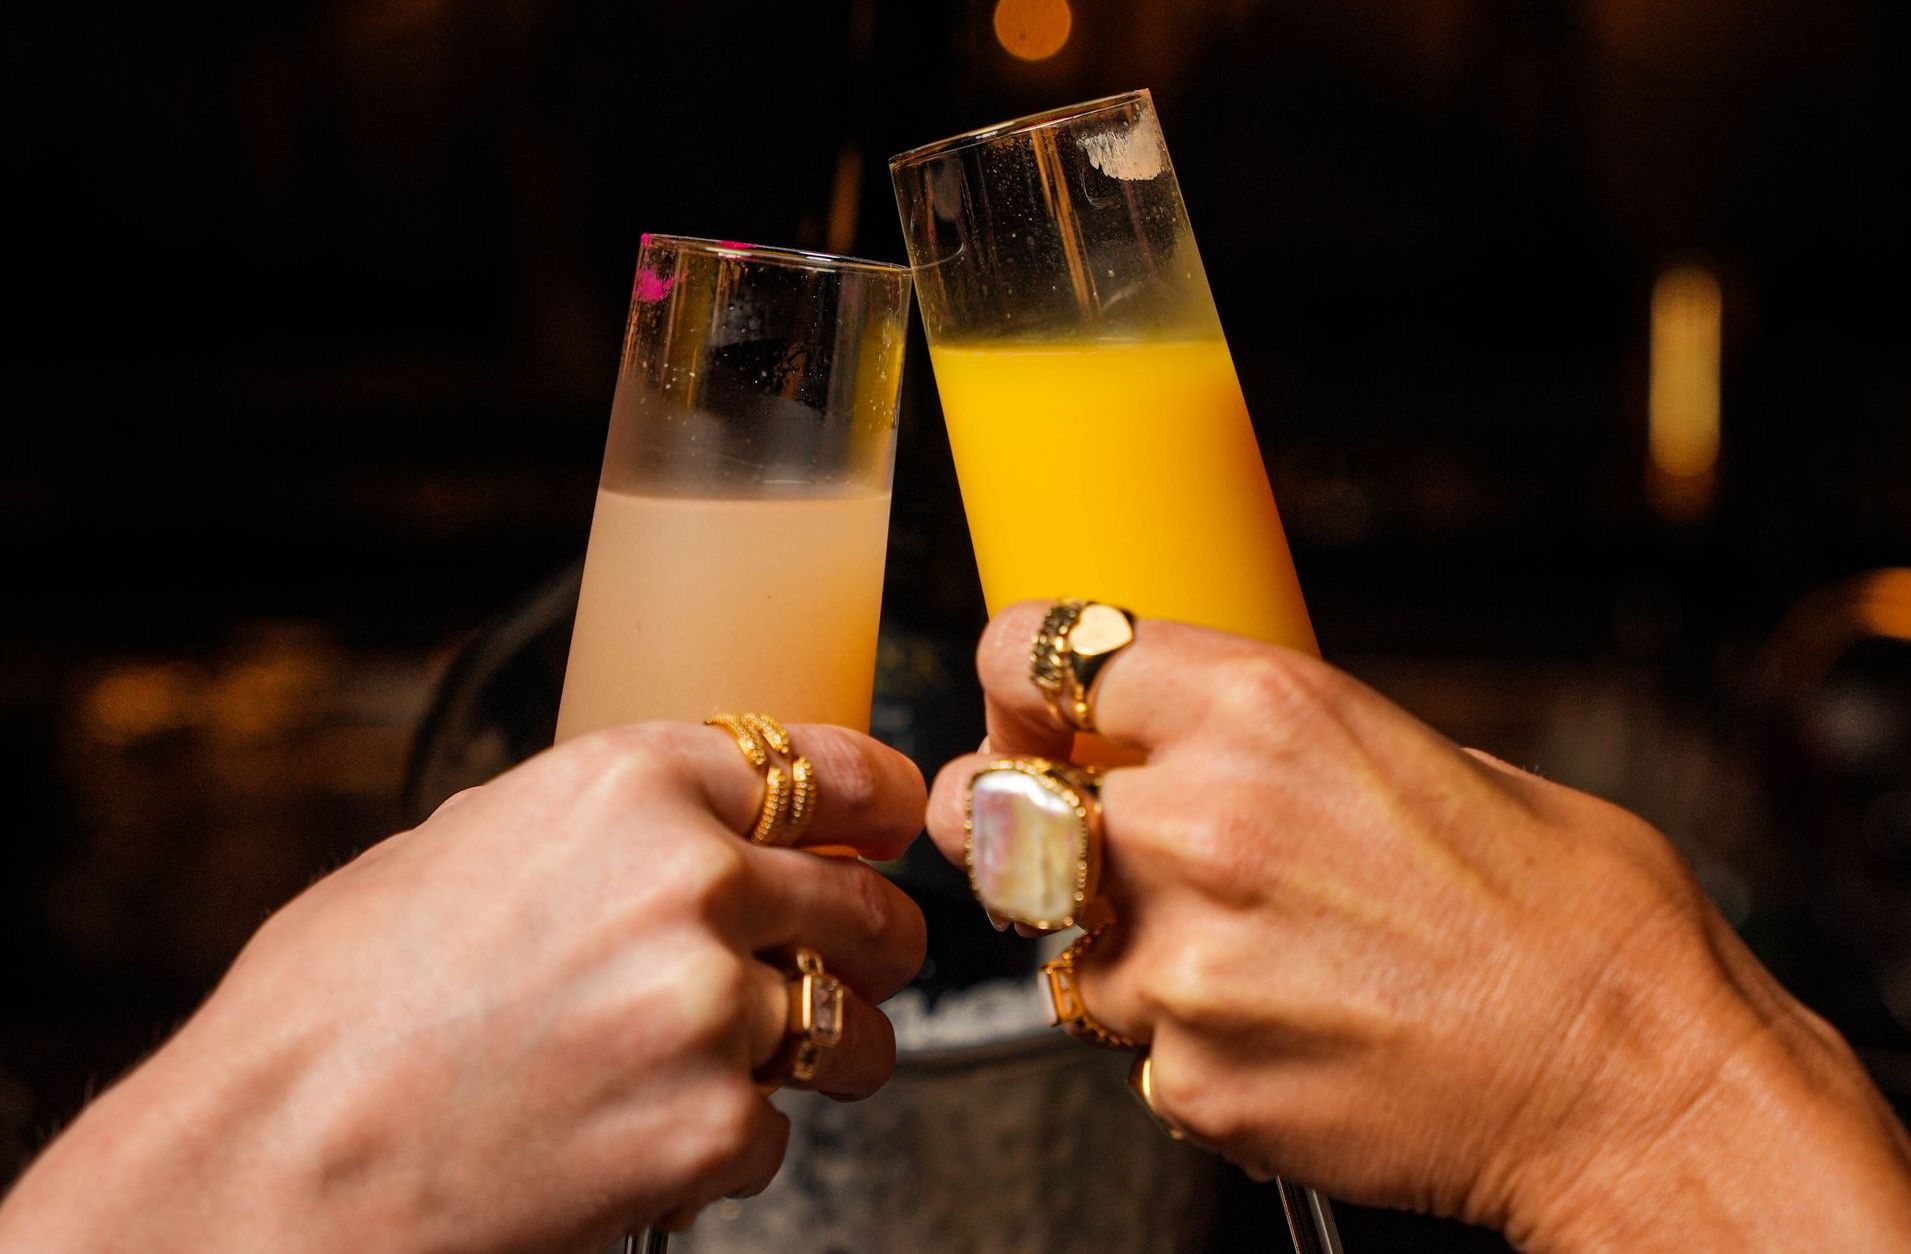 Two people are toasting with champagne glasses filled with orange juice.